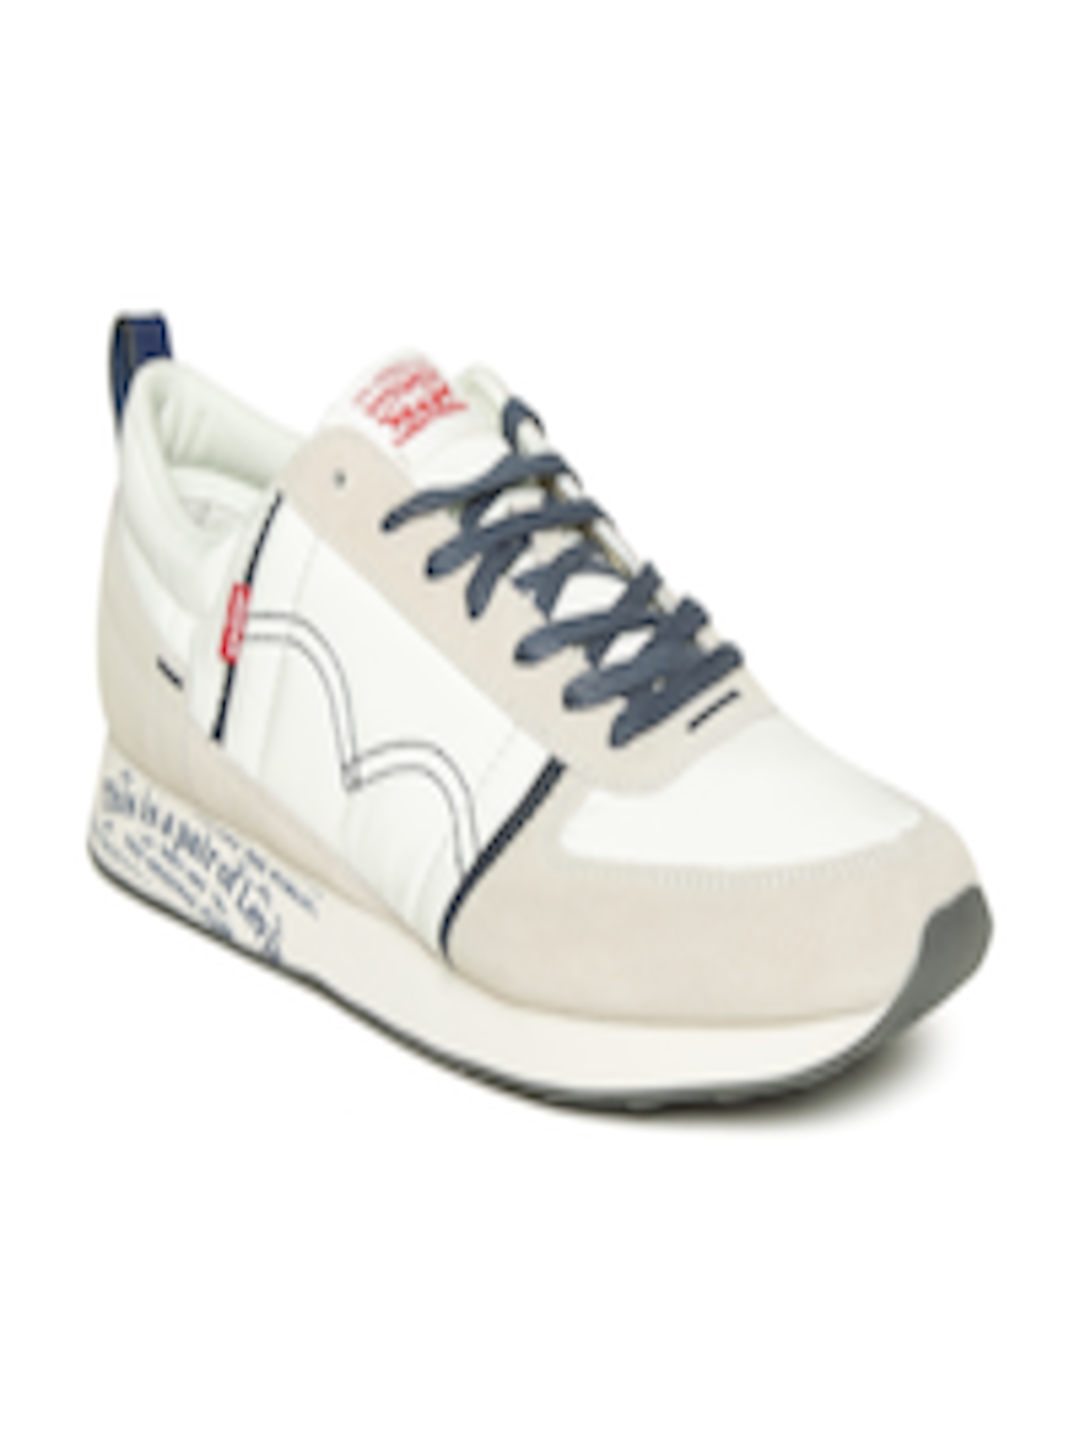 Buy Levis Men Off White & Beige Sneakers - Casual Shoes for Men 2447476 | Myntra